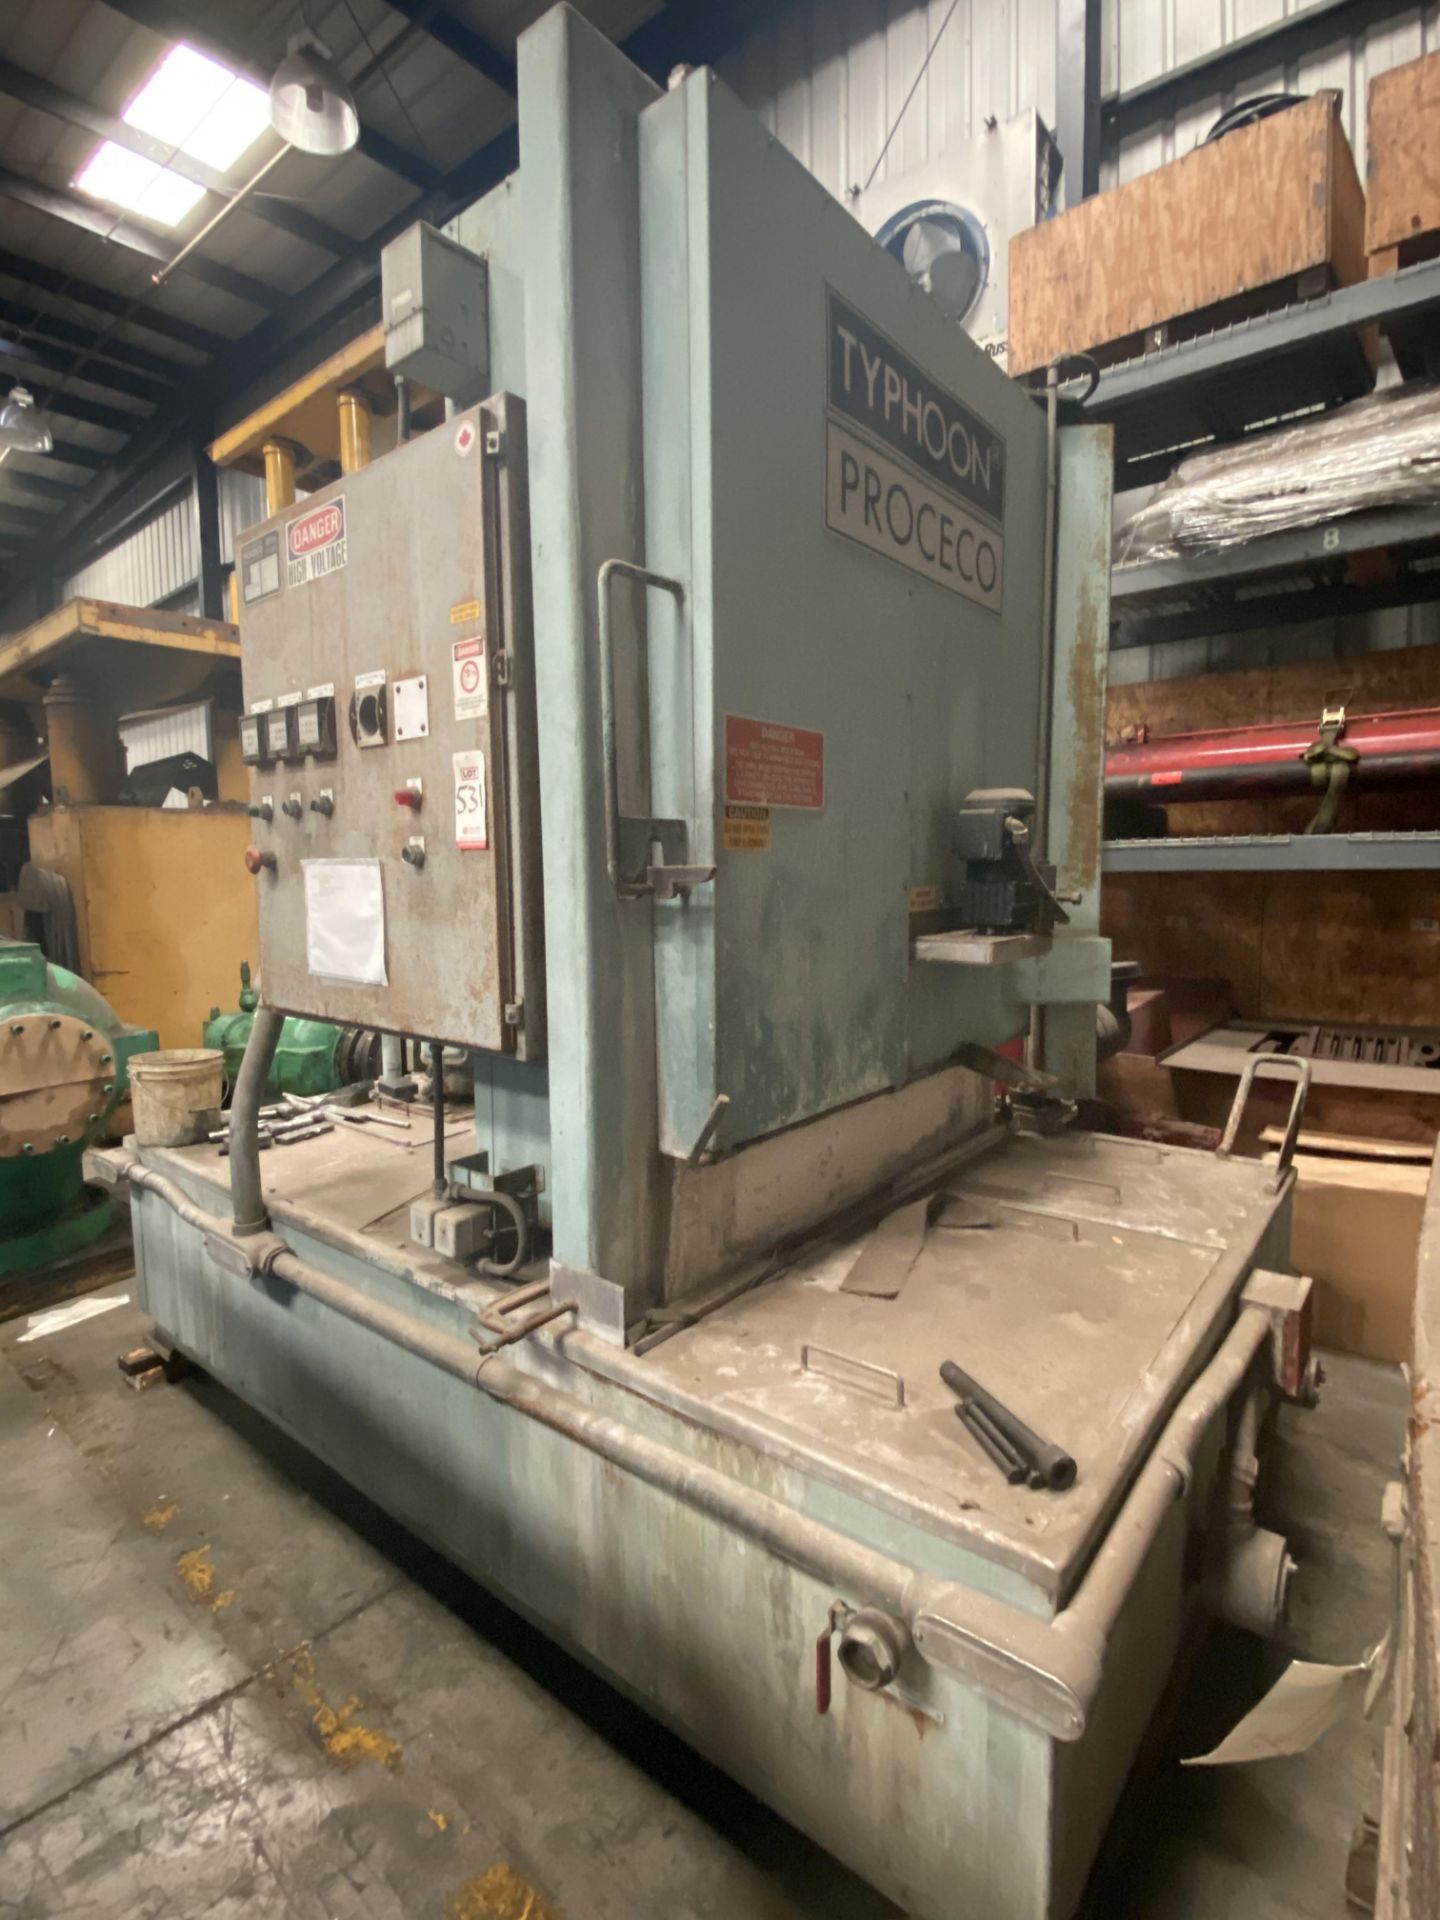 PROCECO INDUSTRIAL PARTS WASHER, MODEL TYPHOON HD, S/N 93-220 - Image 2 of 11